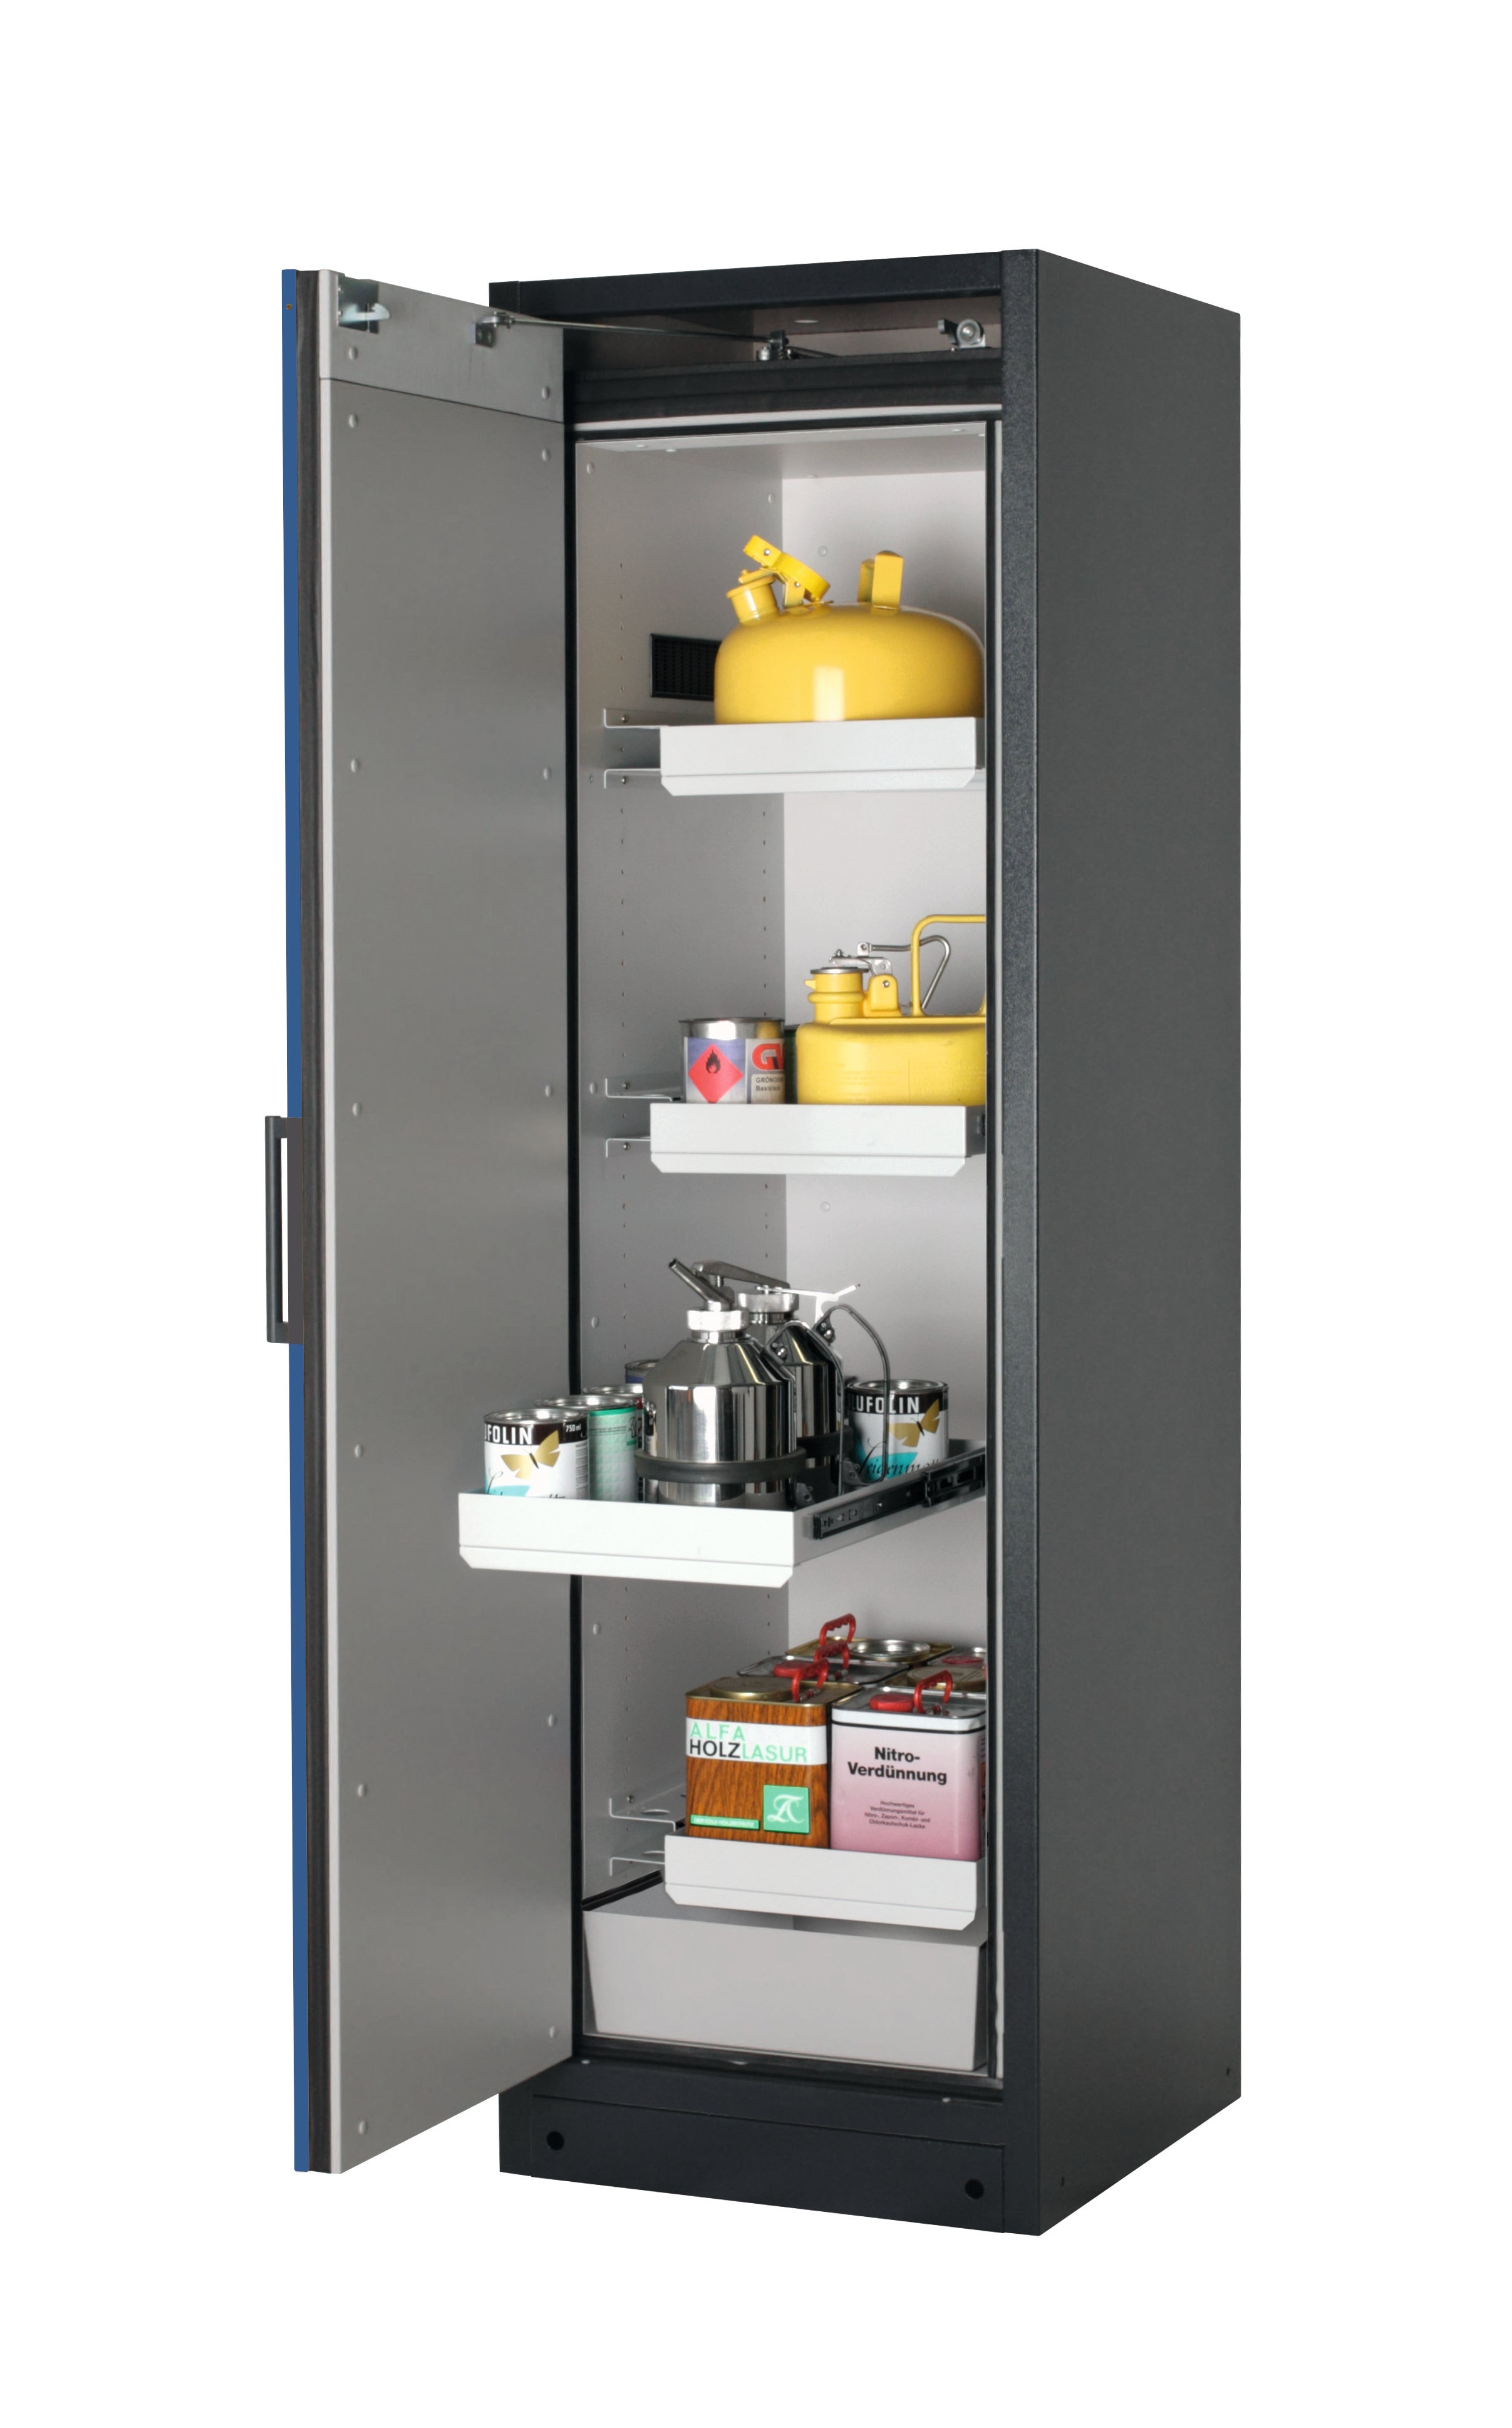 Type 90 safety storage cabinet Q-PEGASUS-90 model Q90.195.060.WDAC in gentian blue RAL 5010 with 3x drawer (standard) (sheet steel),